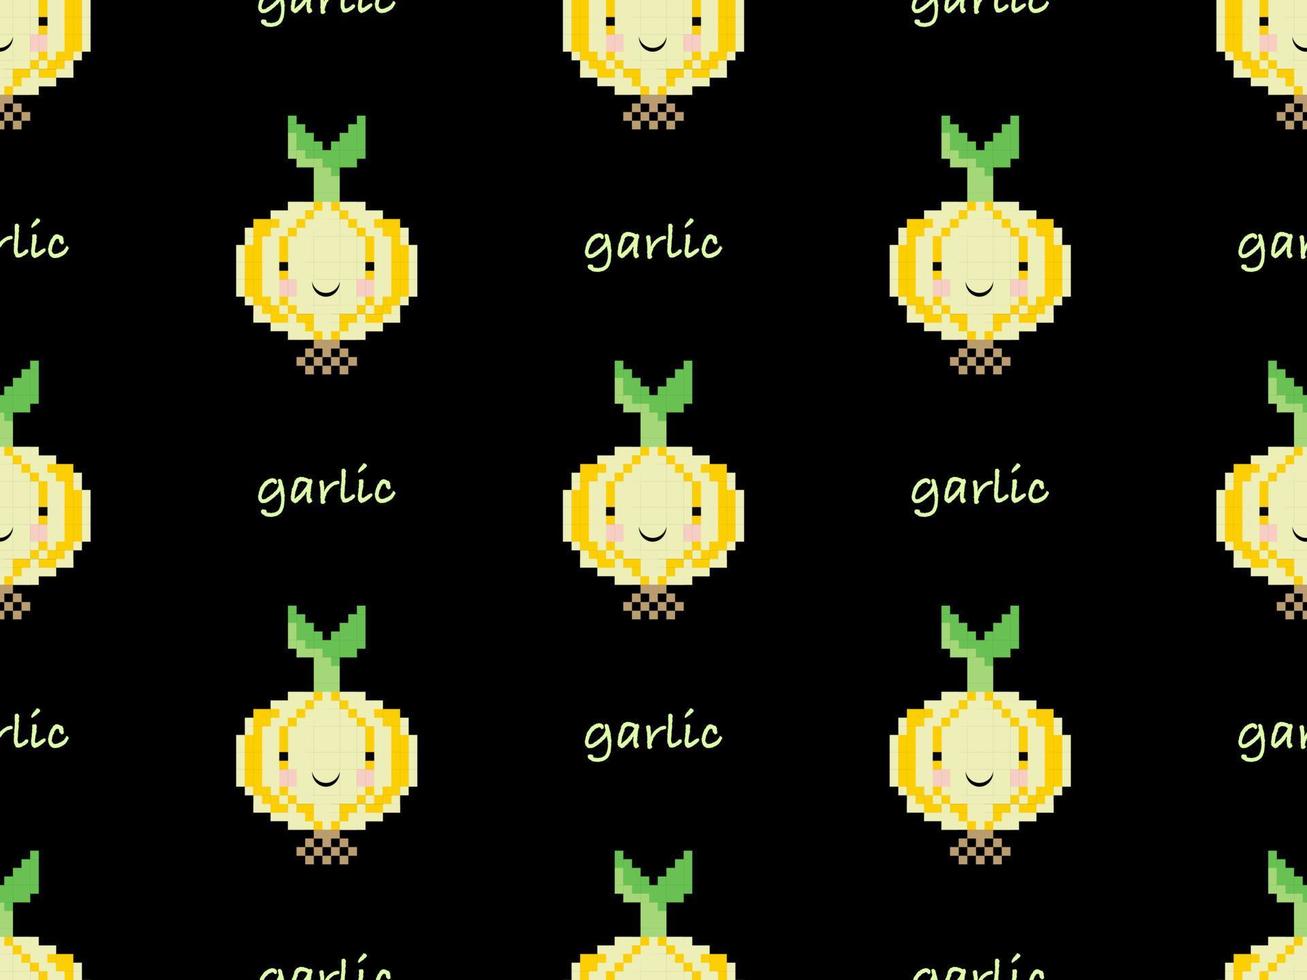 Garlic cartoon character seamless pattern on black background. Pixel style. vector